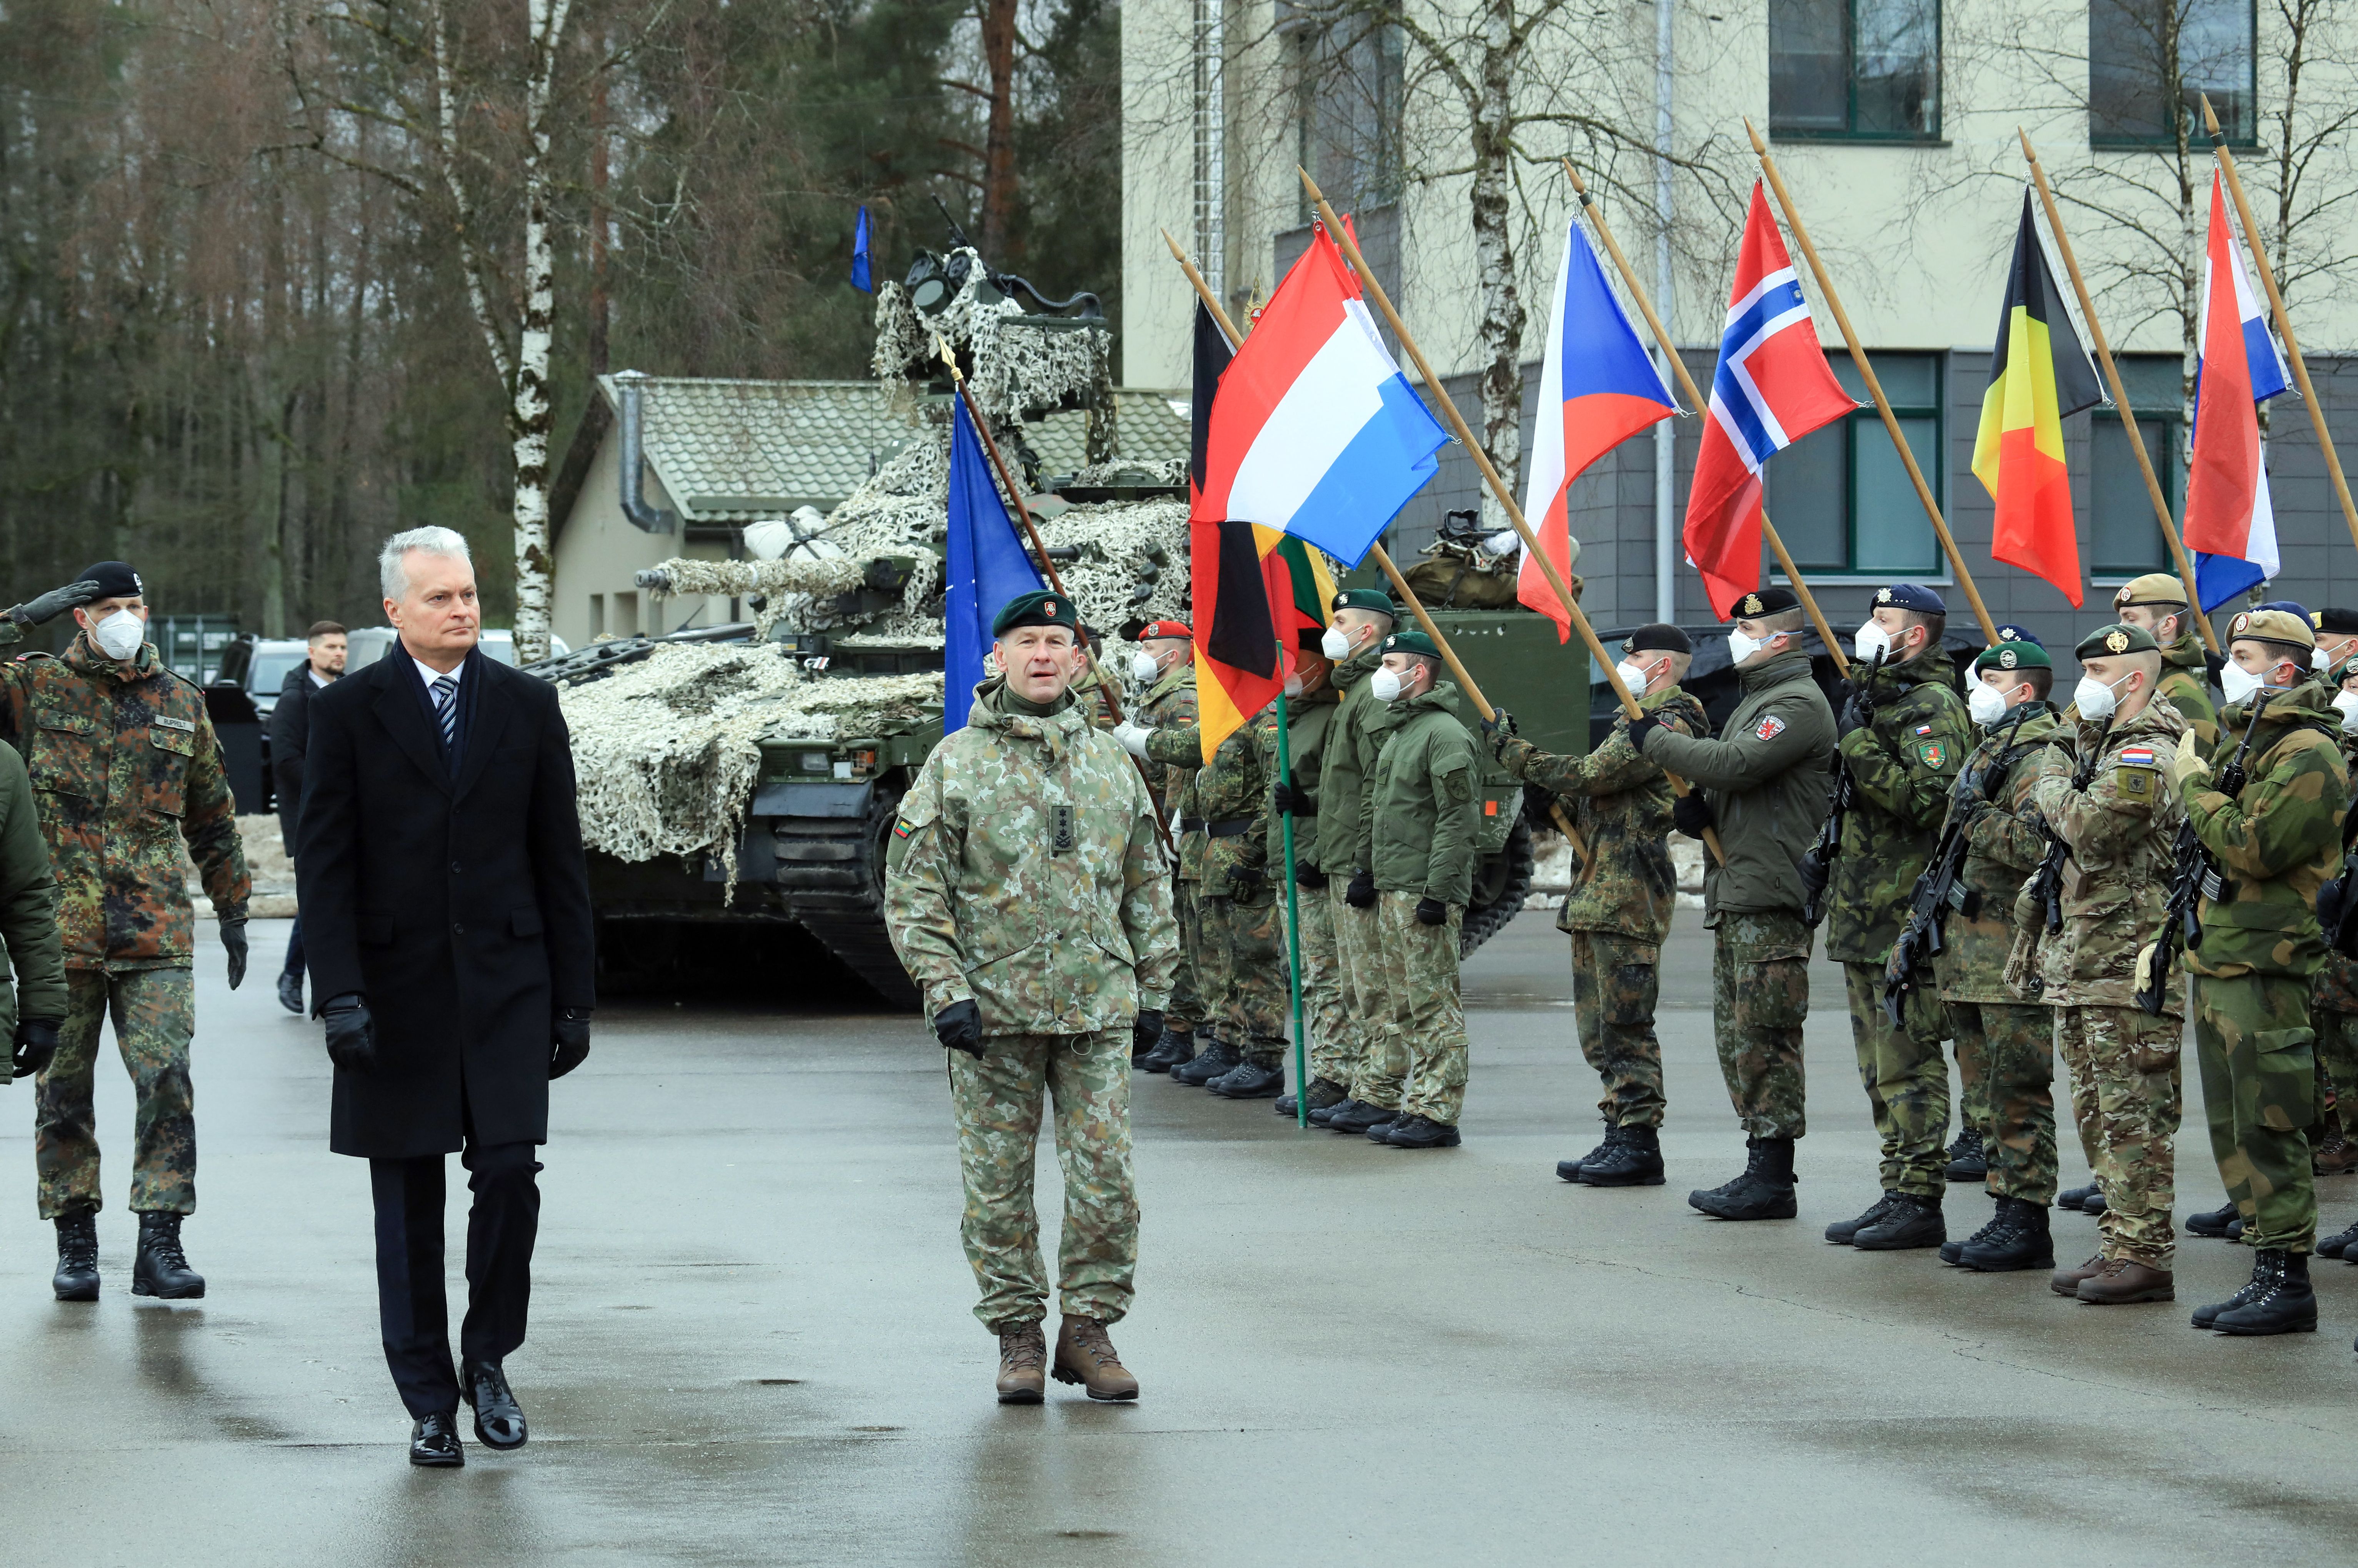 Lithuanian President Gitanas Nauseda (2ndL) takes part in an official ceremony marking the 5th anniversary of NATO’s enhanced Forward Presence in the eastern part of the Alliance in Rukla, Lithuania, on February 9, 2022.